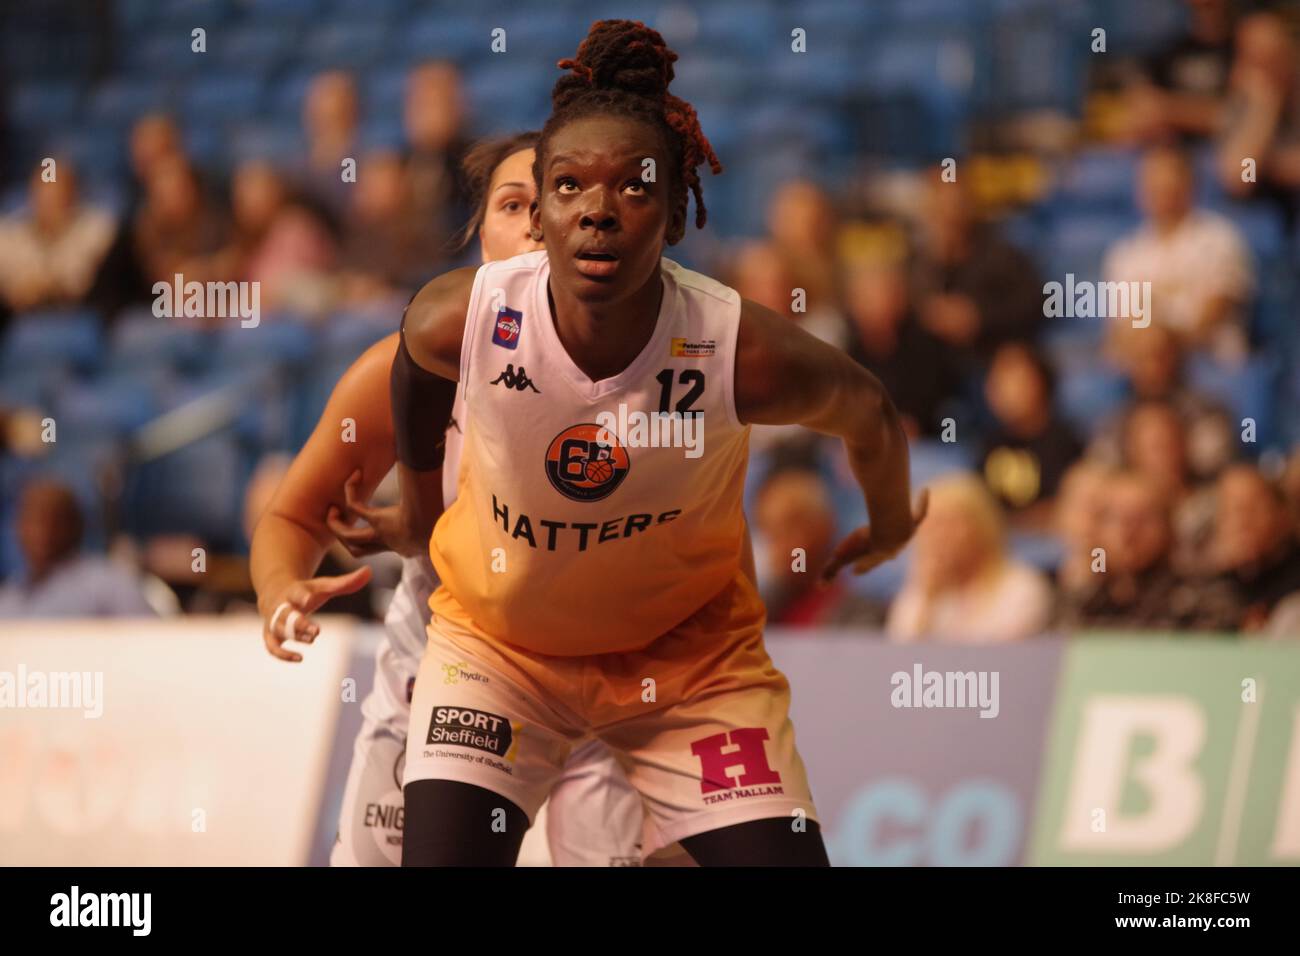 Sheffield, England, 23 October 2022. Lena Niang playing for Sheffield Hatters against Newcastle Eagles in a WBBL match at Ponds Forge. Credit: Colin Edwards/Alamy Live News. Stock Photo